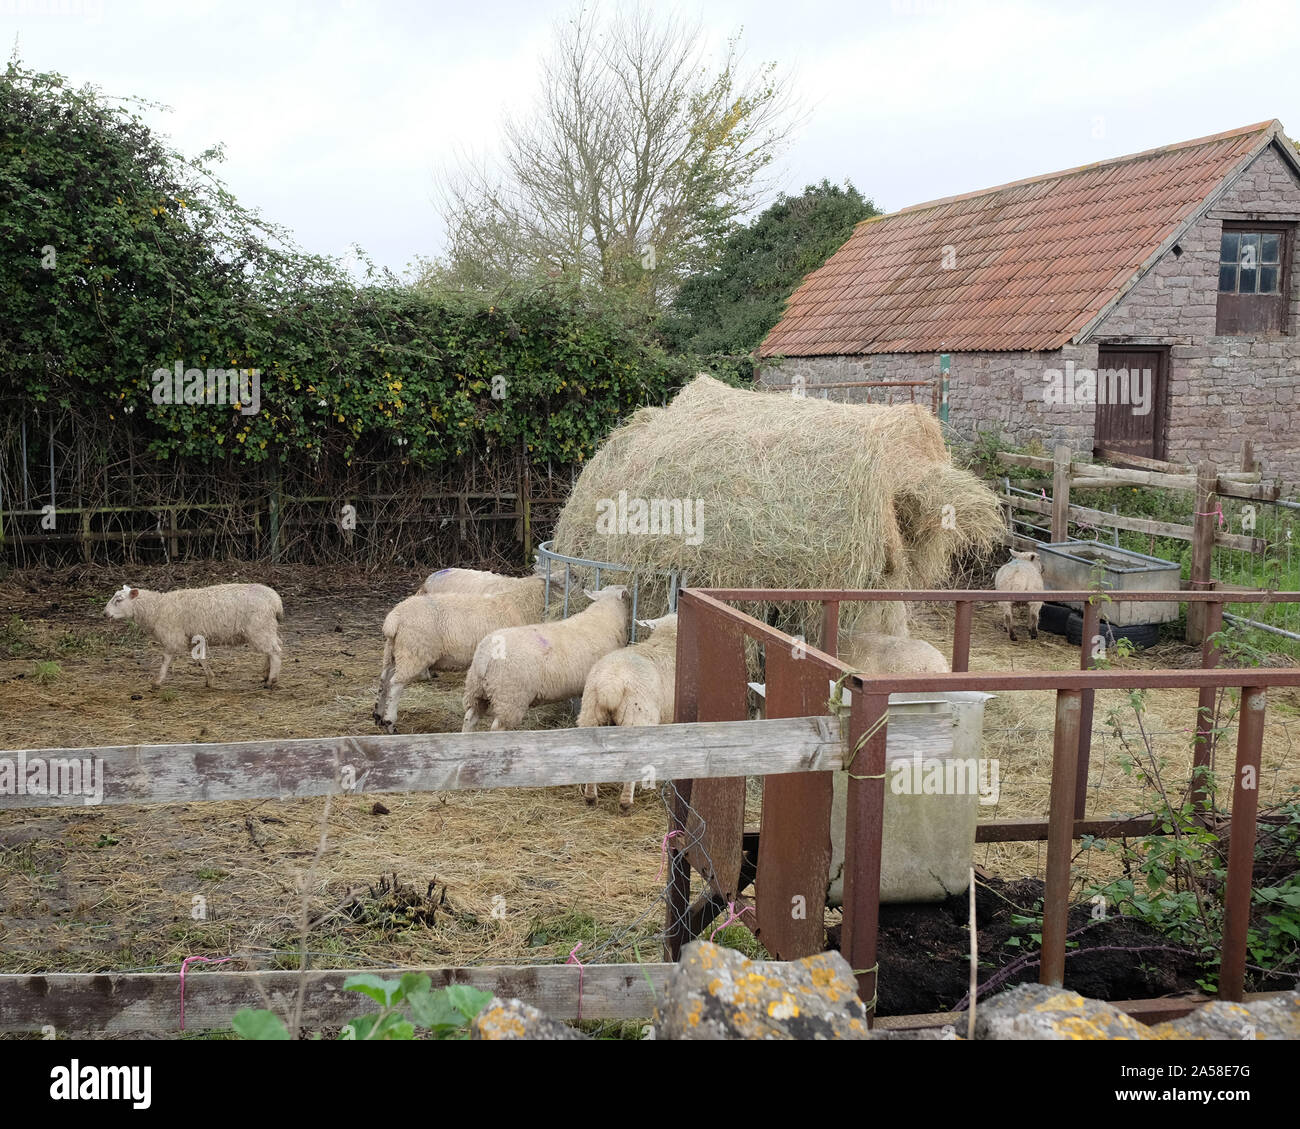 October 2019 - farm yard sheep eating from a feeder Stock Photo